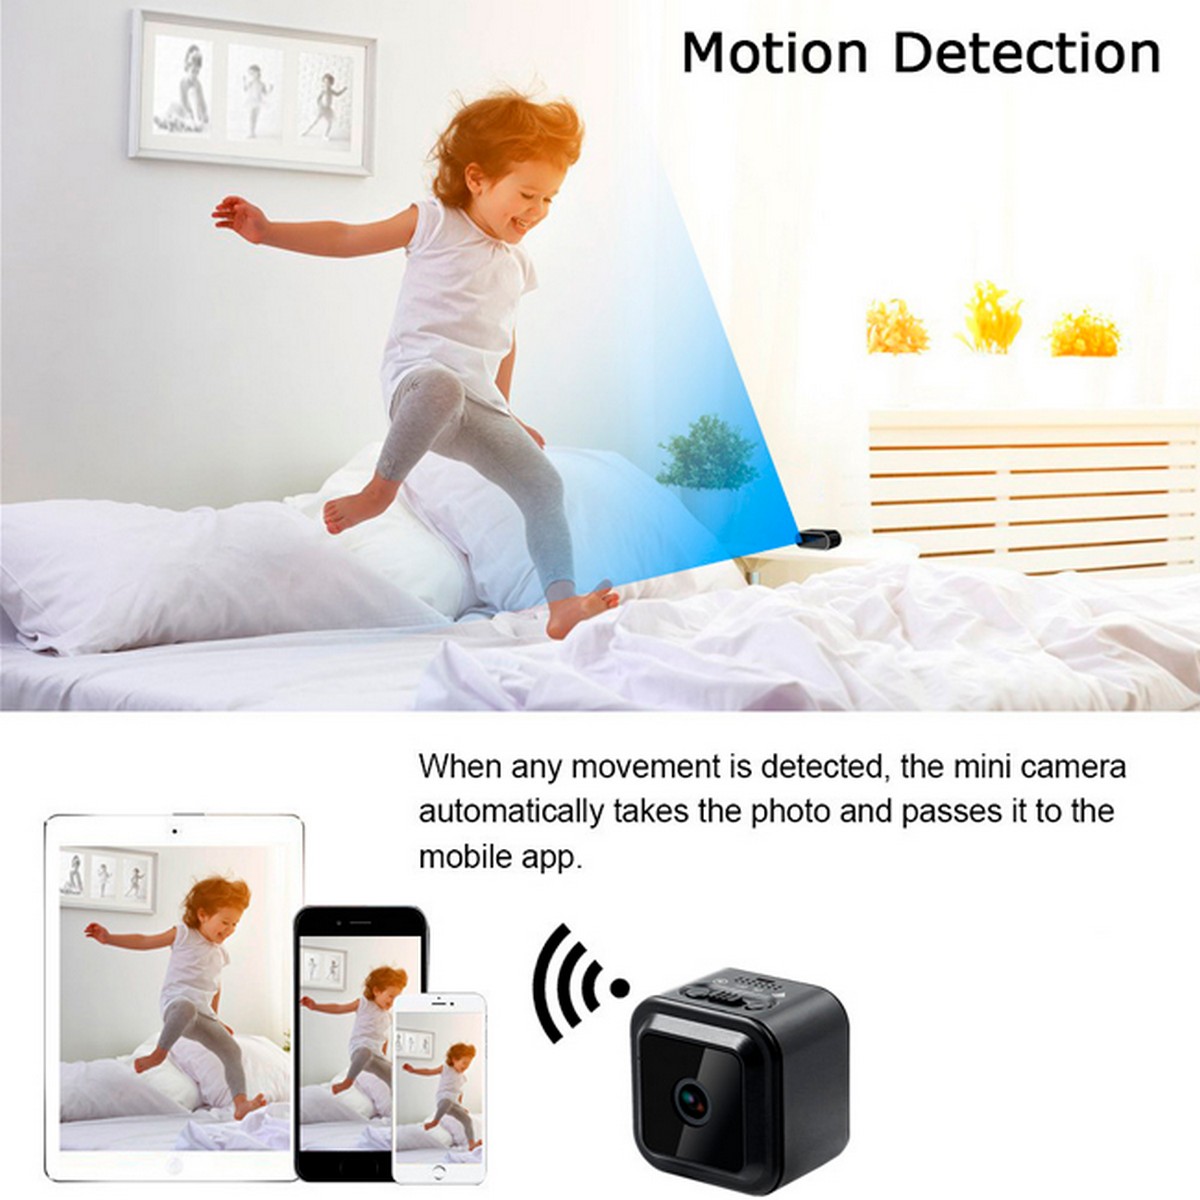 motion detection in spy camera